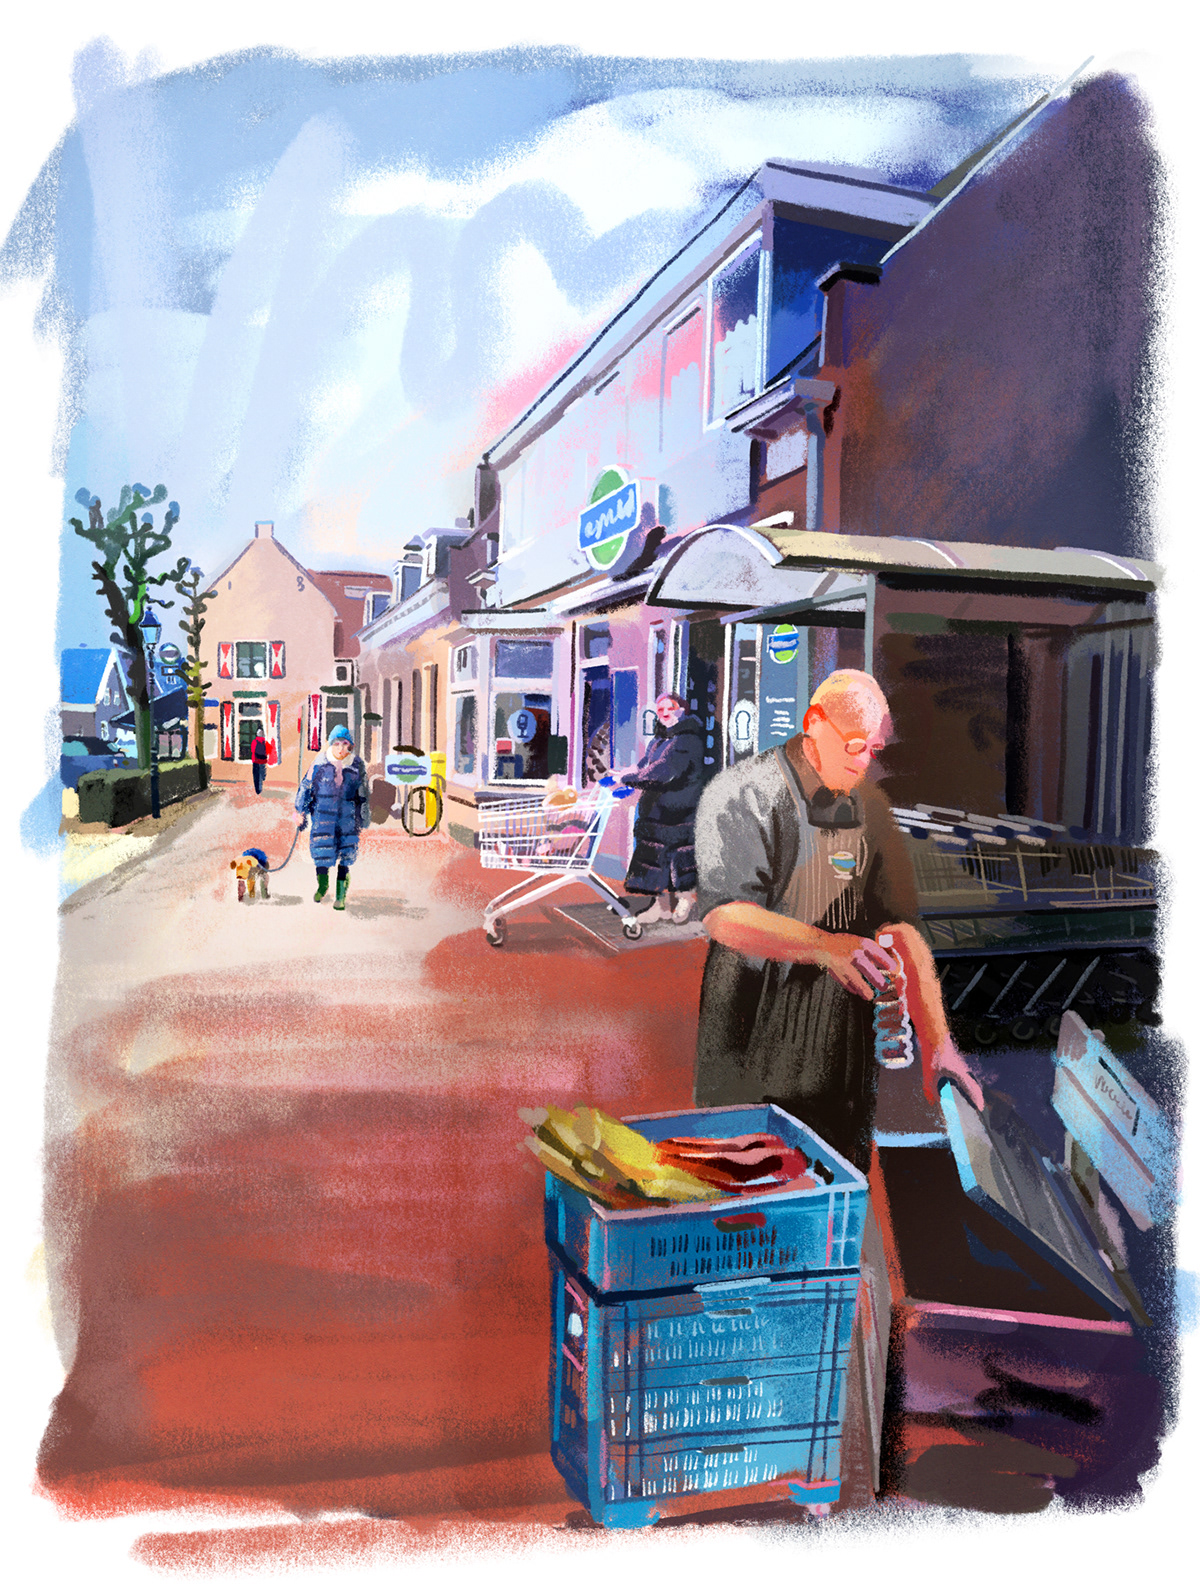 cover illustration illustrated reportage magazineillustration Netherlands reportage social social Illustration Street street illustration village